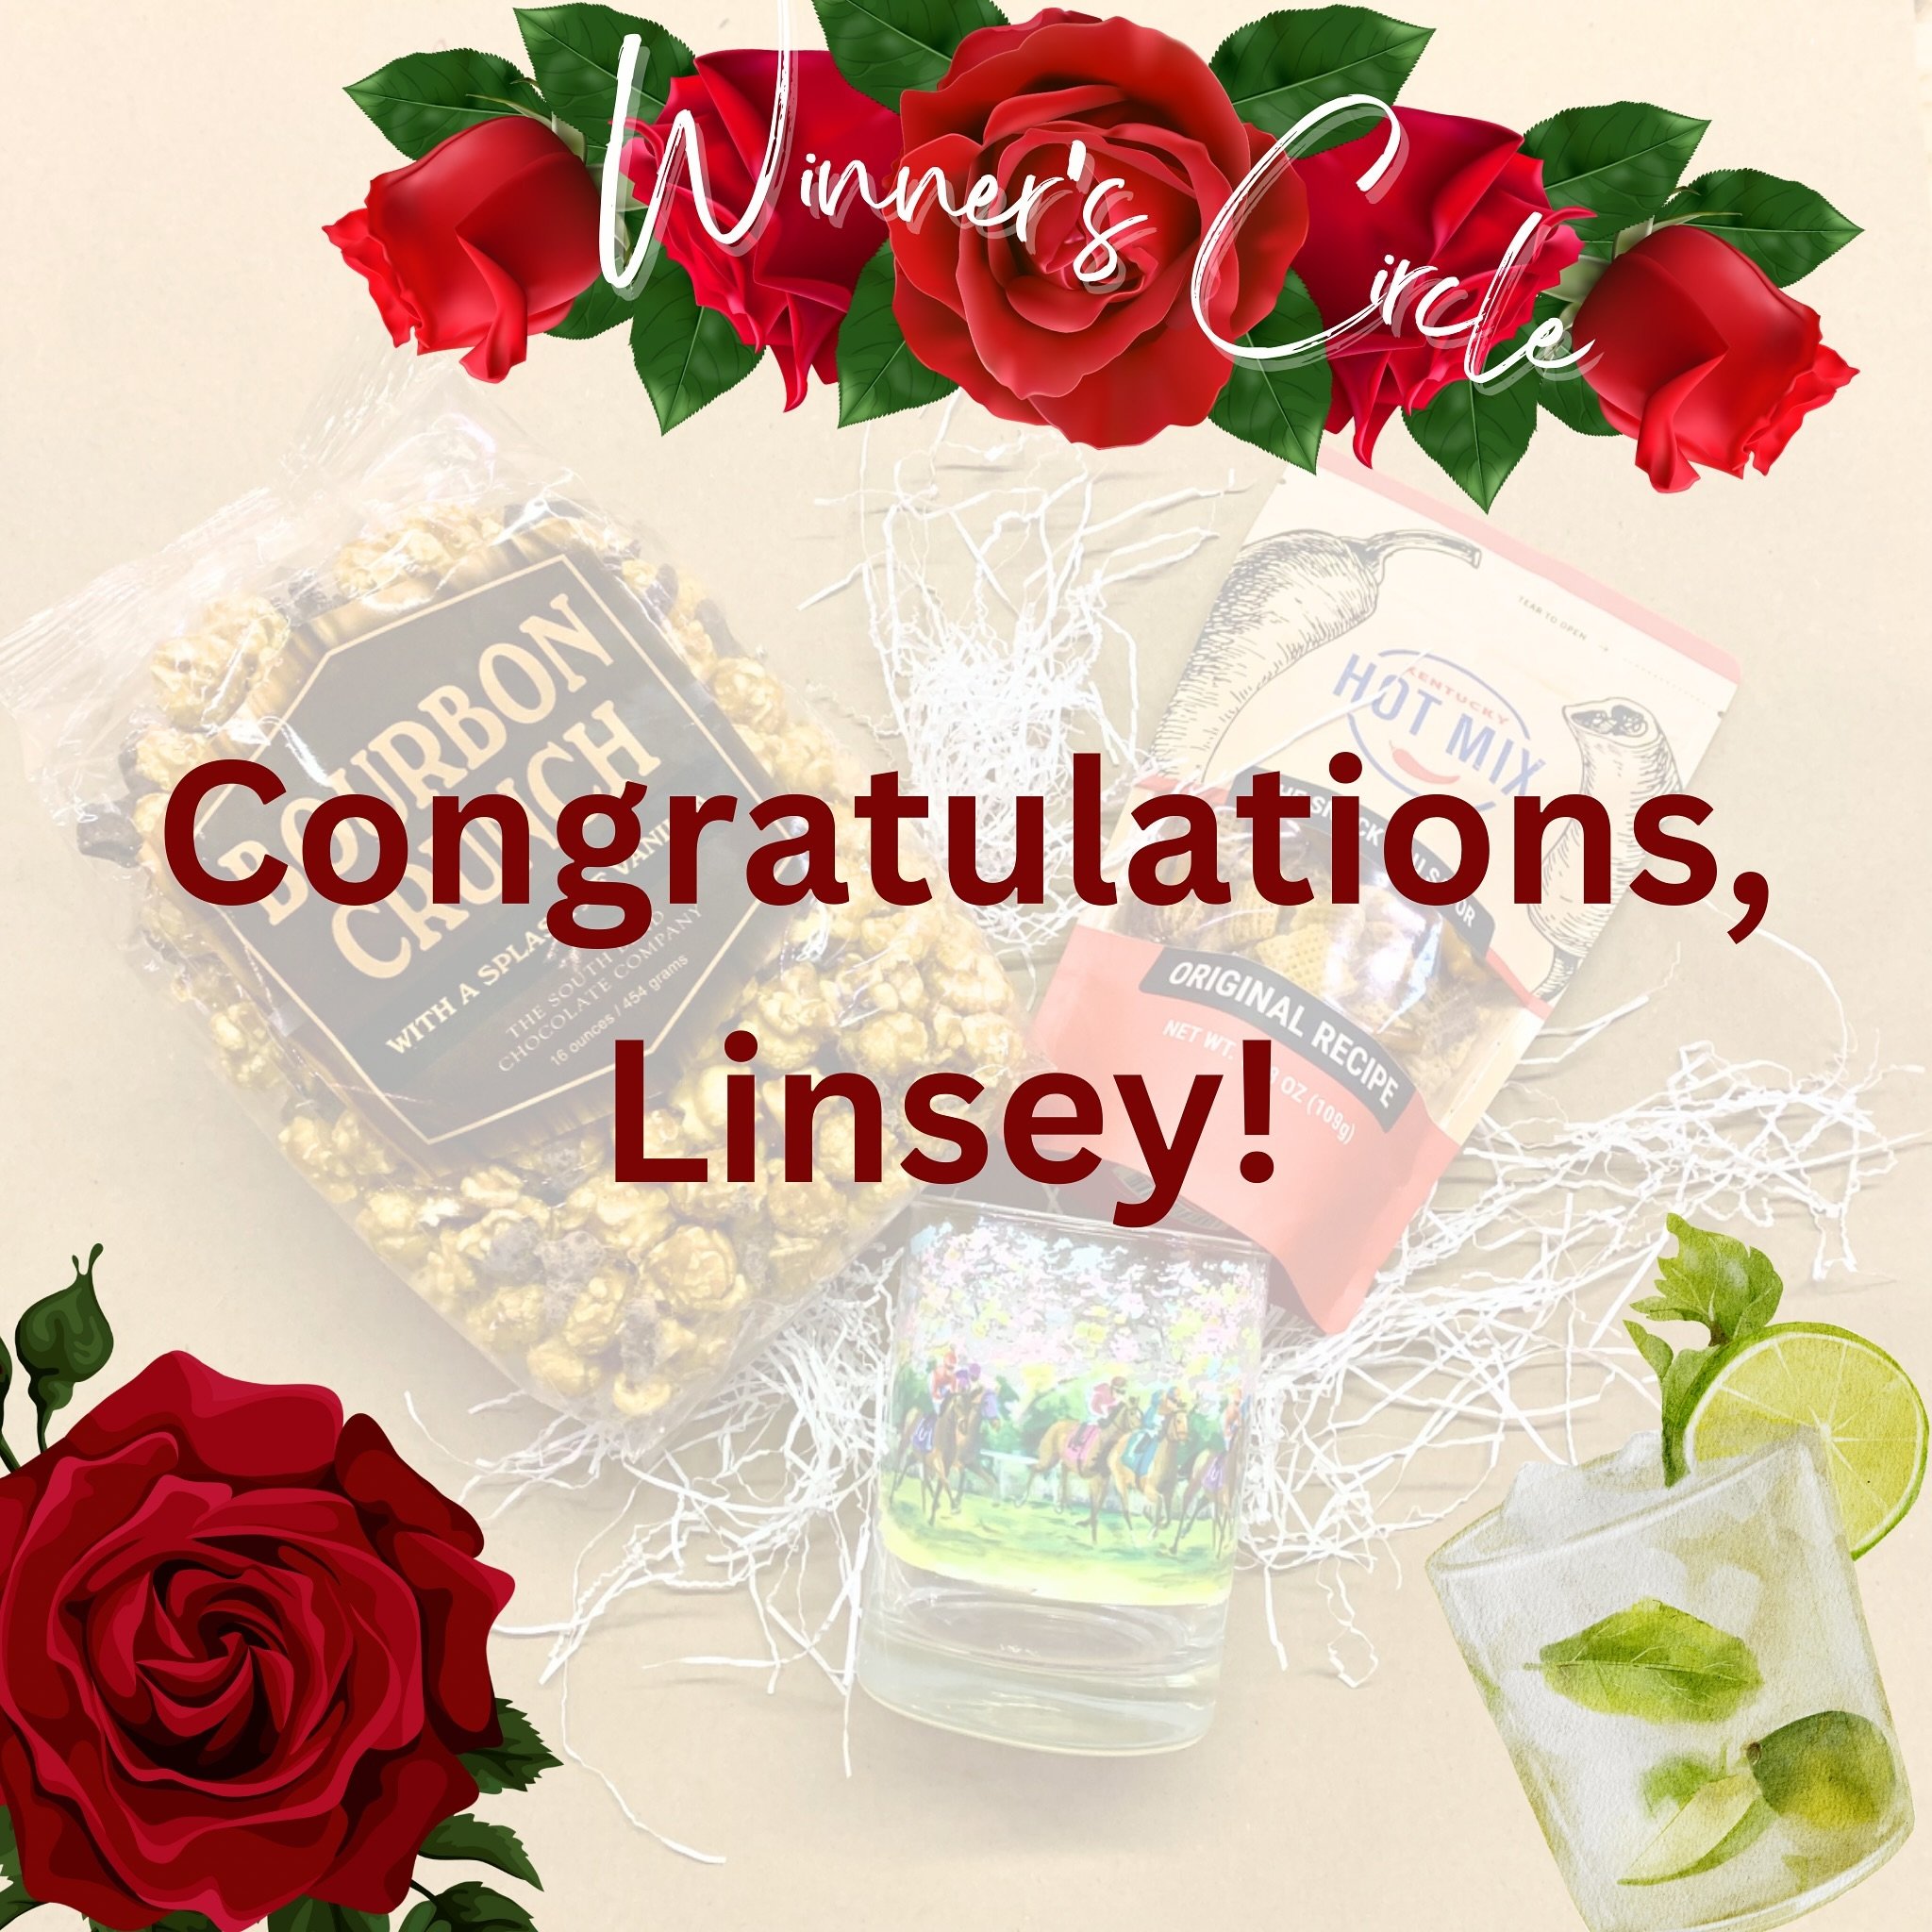 Congratulations to @linseyemc! She&rsquo;s the winner of our Derby Bundle! 
Stick around for more fun, more gift ideas, and more giveaways! 

Give the best gift, host the best gathering, have the most fun.
🏬Shop in Store: 321 Broadway, Paducah, KY
?